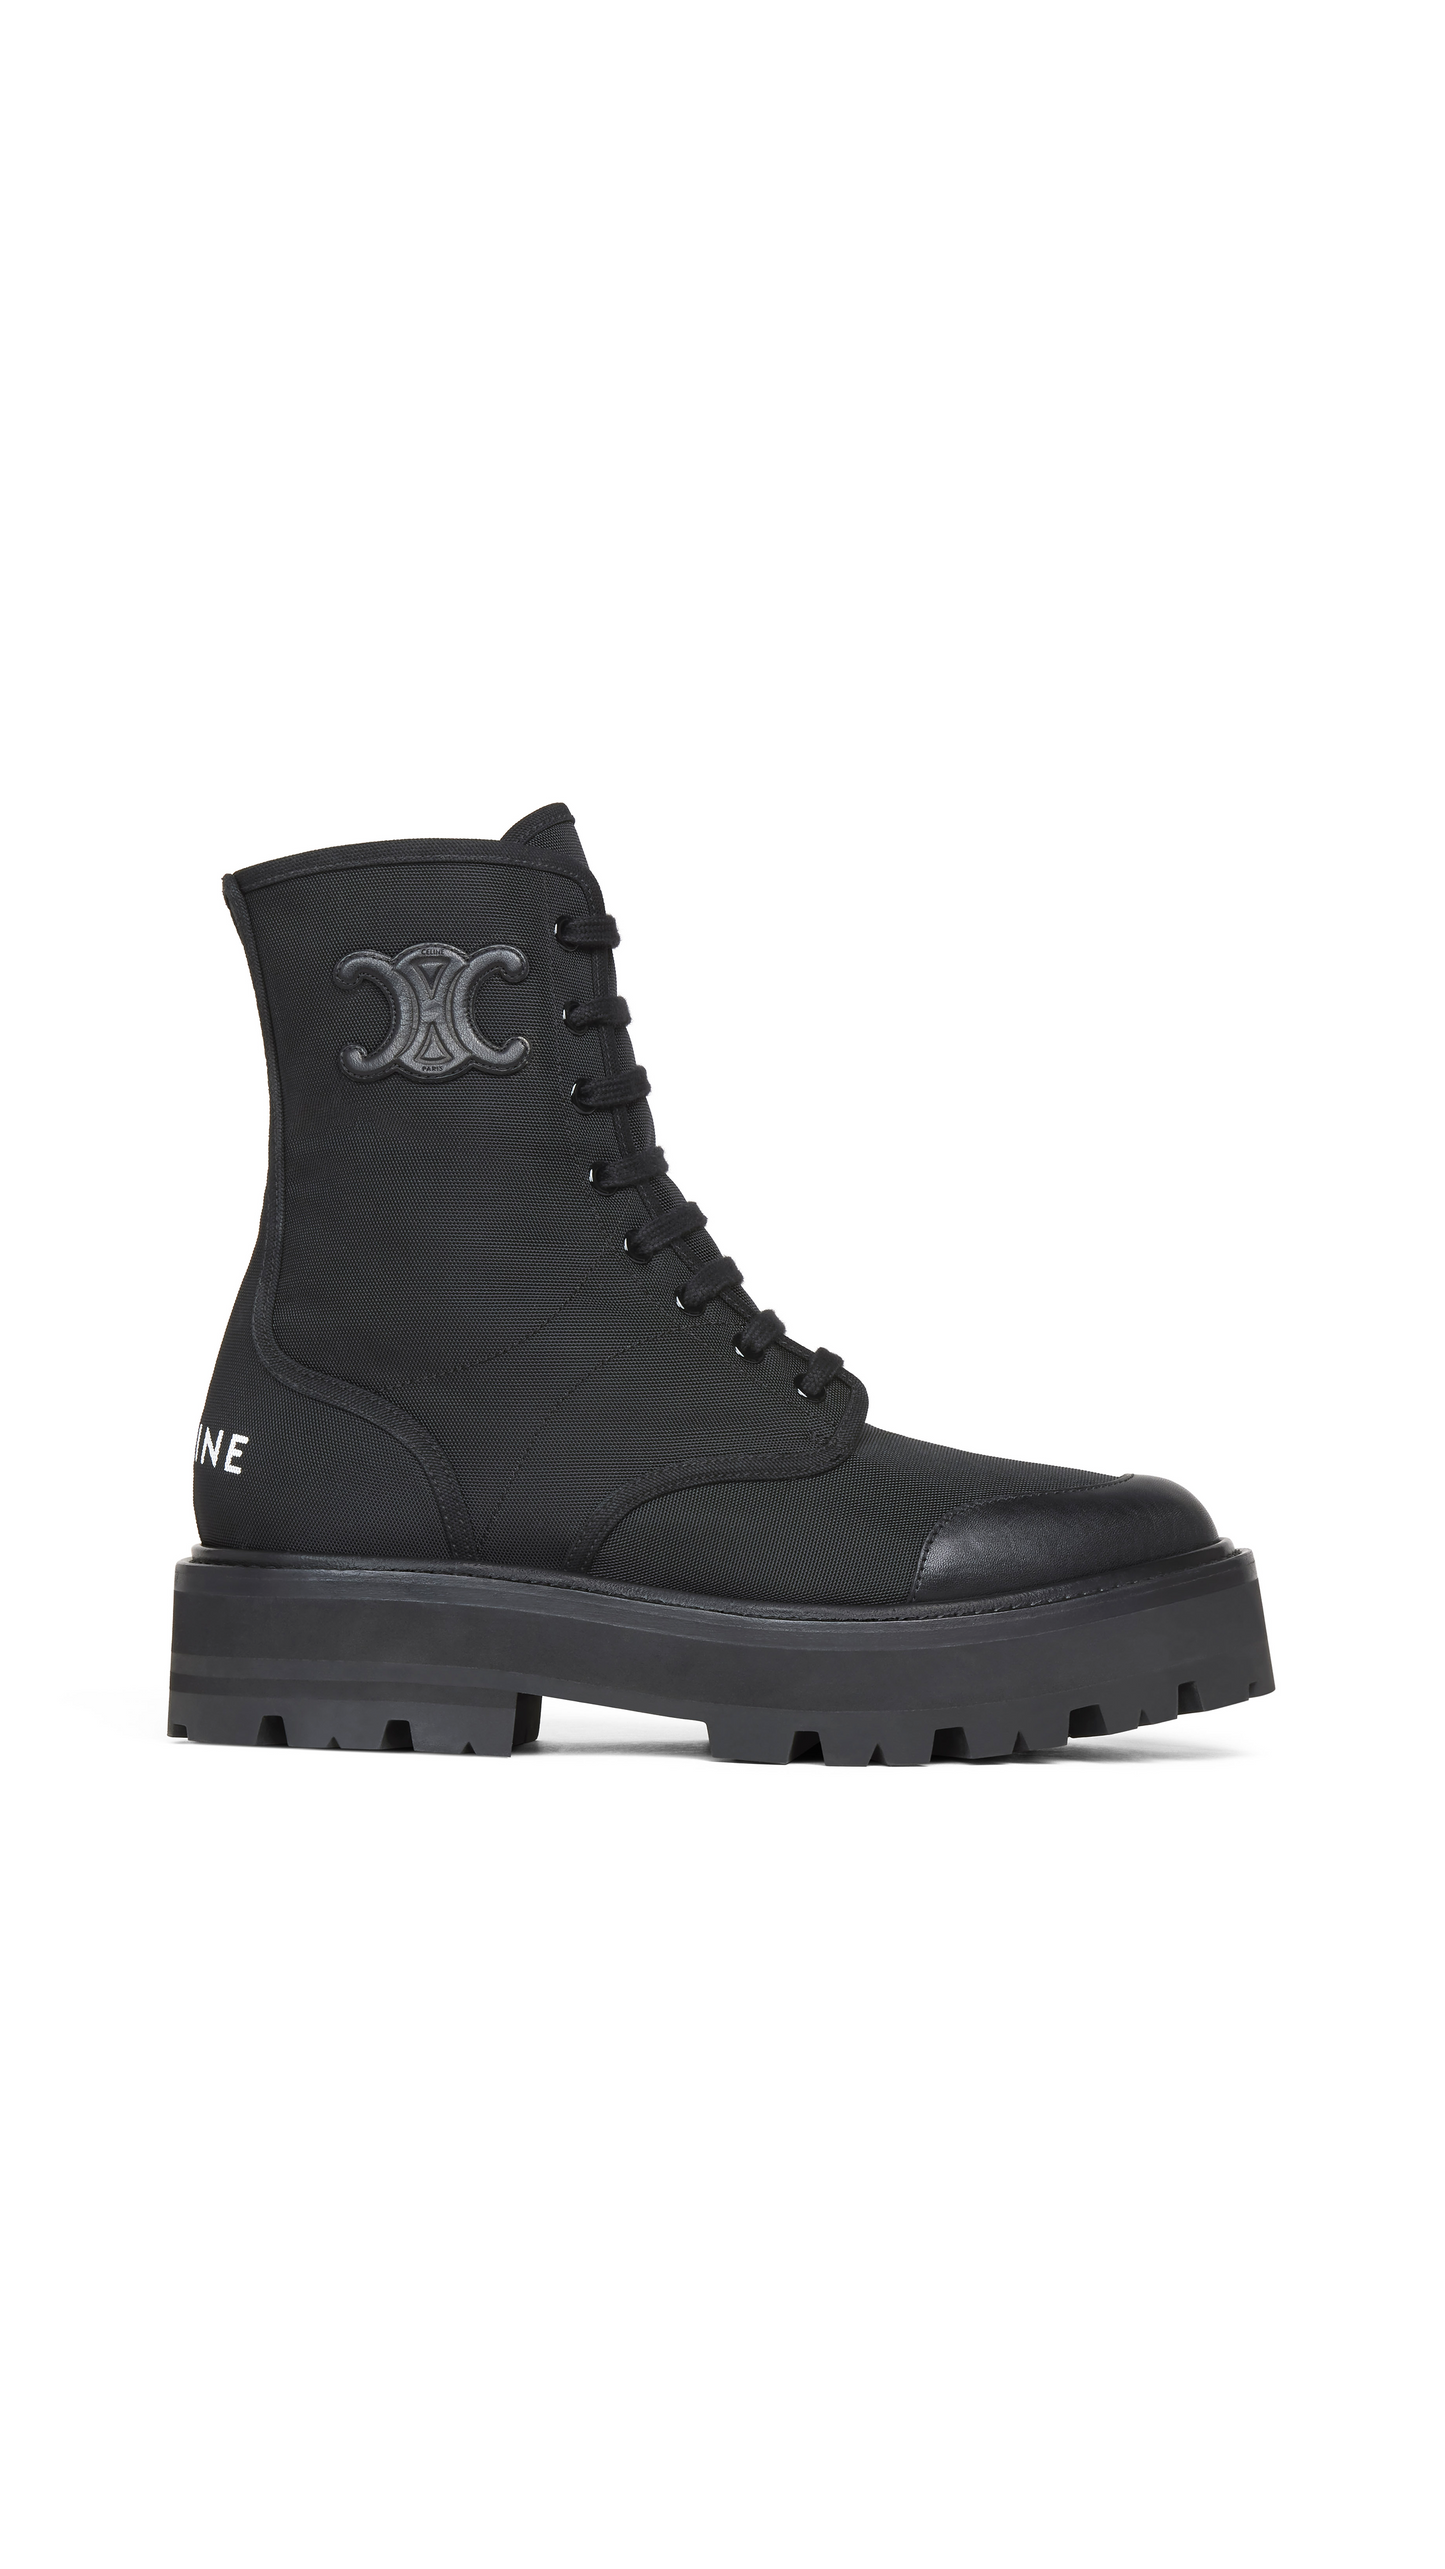 Bulky Laced Up Boot In Nylon And Shiny Bull - Black